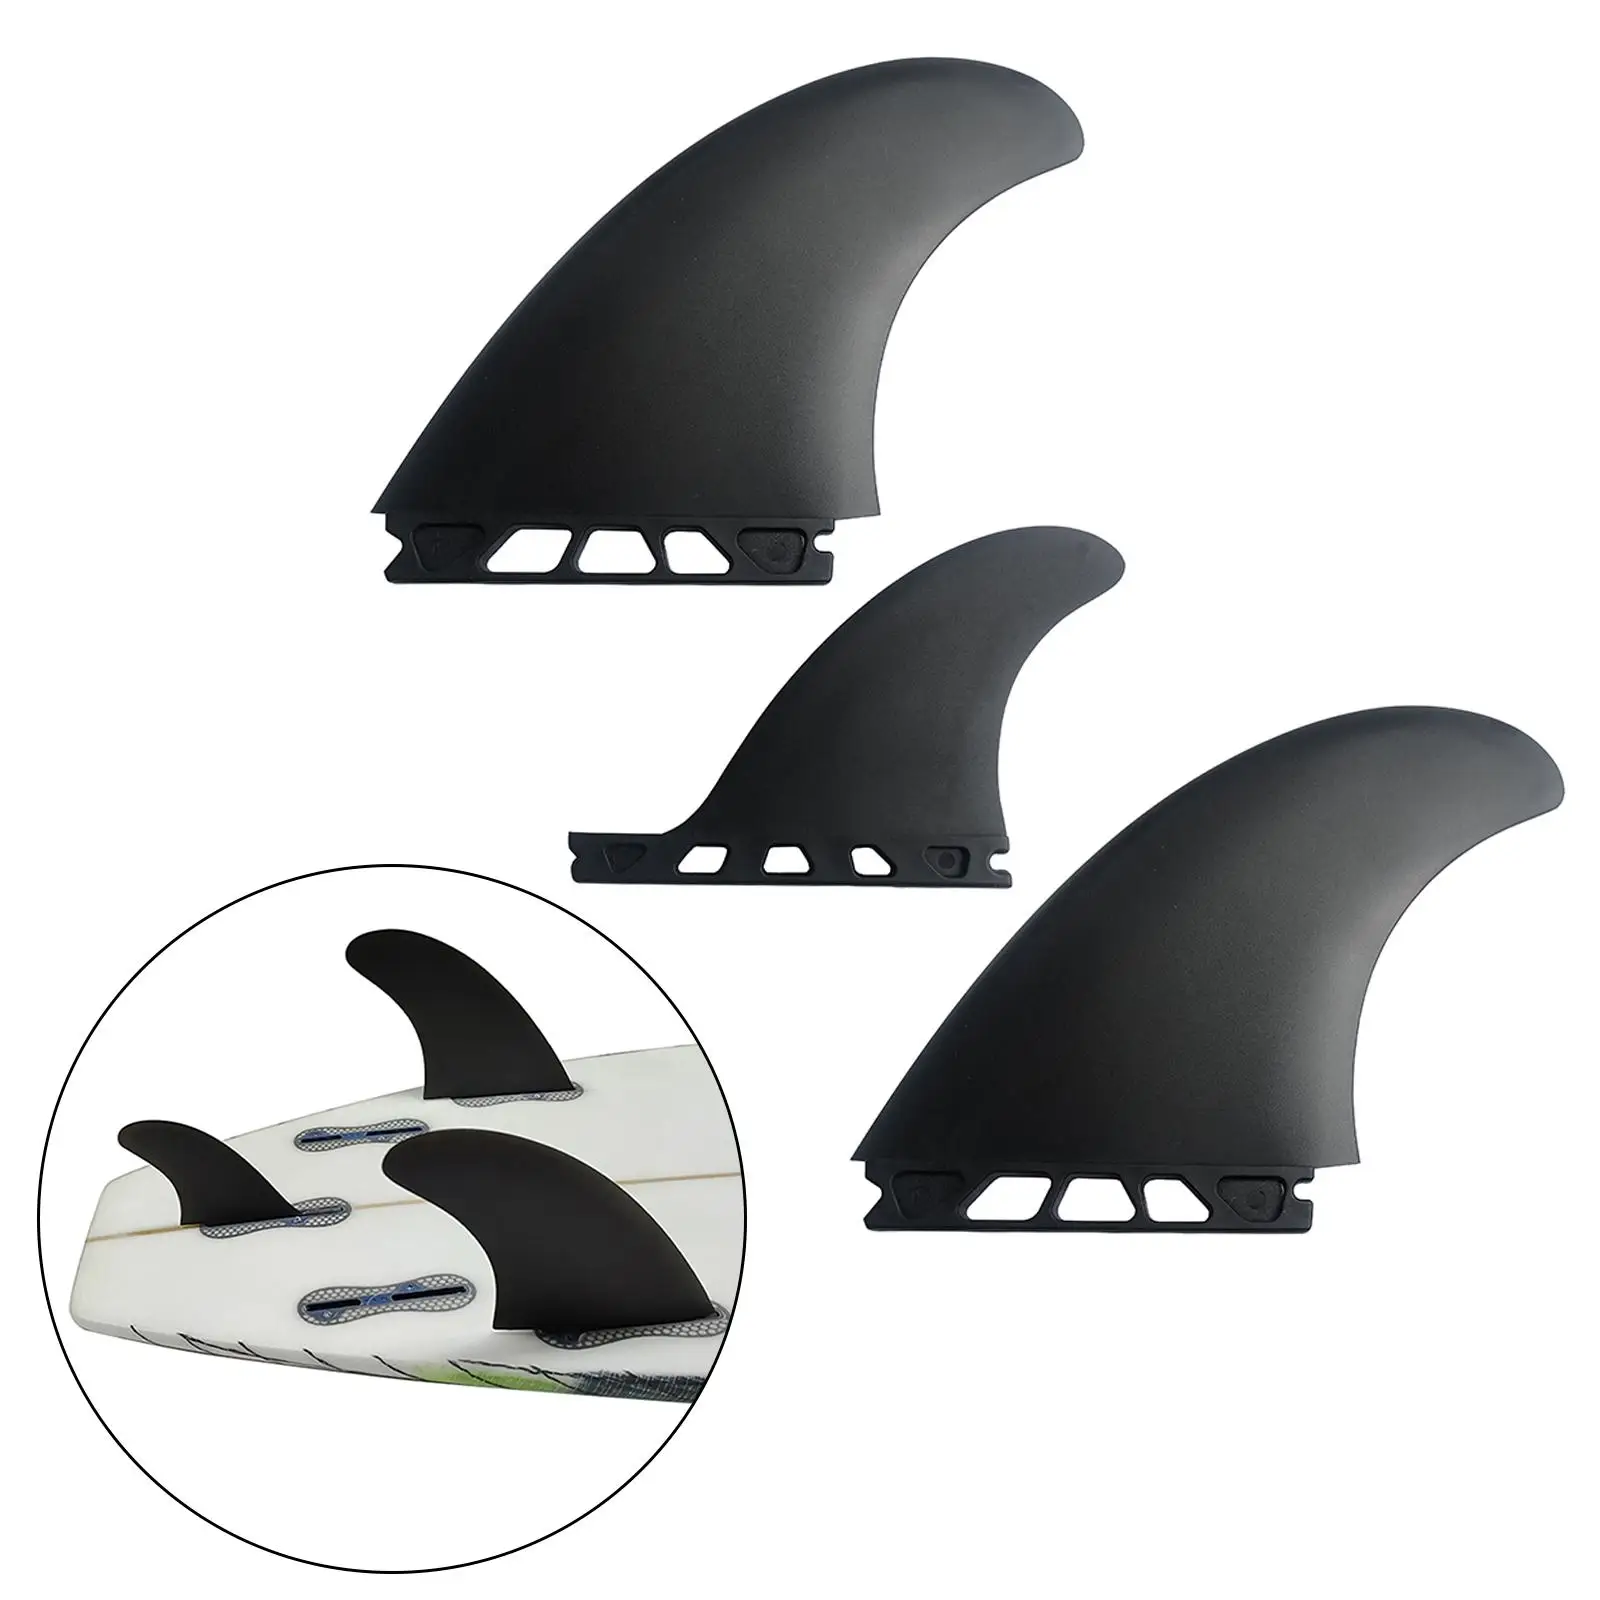 3Pcs Universal Surfboard Fins, Quick Release Surfing Fin for Boat Kayak Longboard Paddleboard Accessory